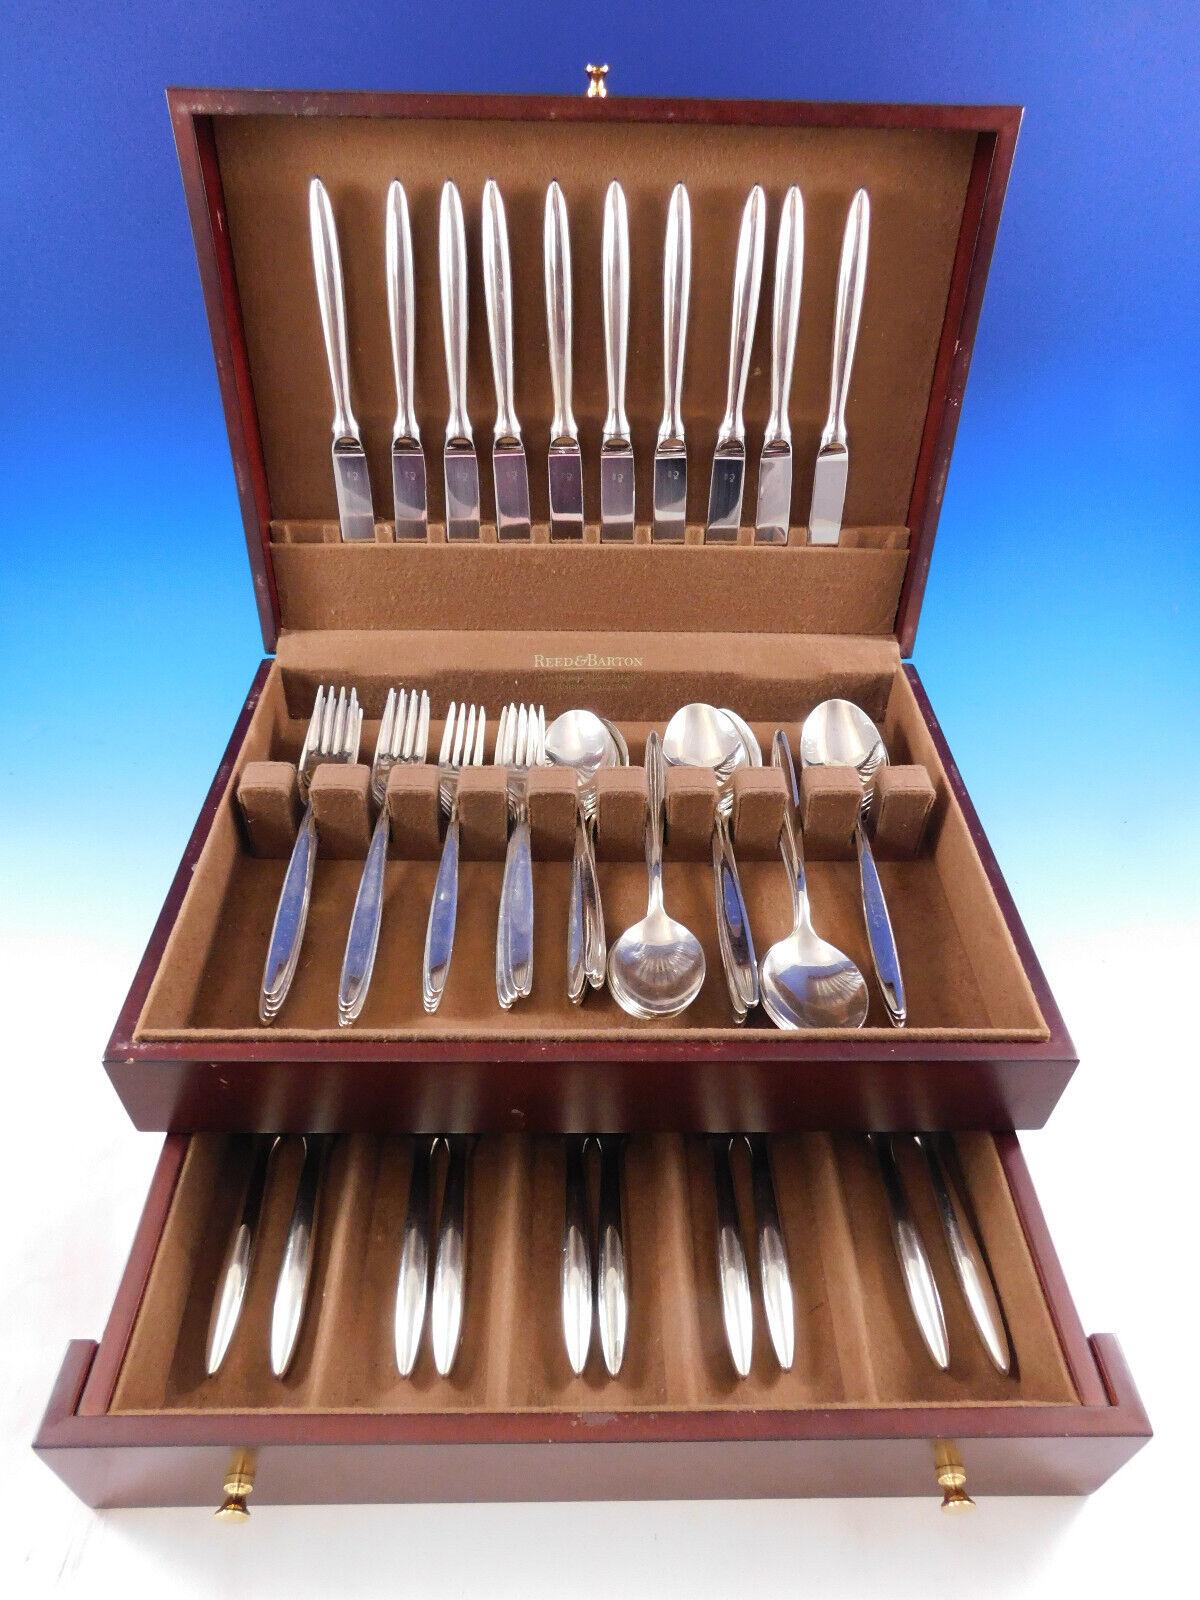 With a dedication to perfection and quality, Christofle flatware creations unite craftsmanship and modern technique, resulting in flatware to be handed down through generations. 

Scarce Orleans by Christofle France Silverplate Flatware set - 60